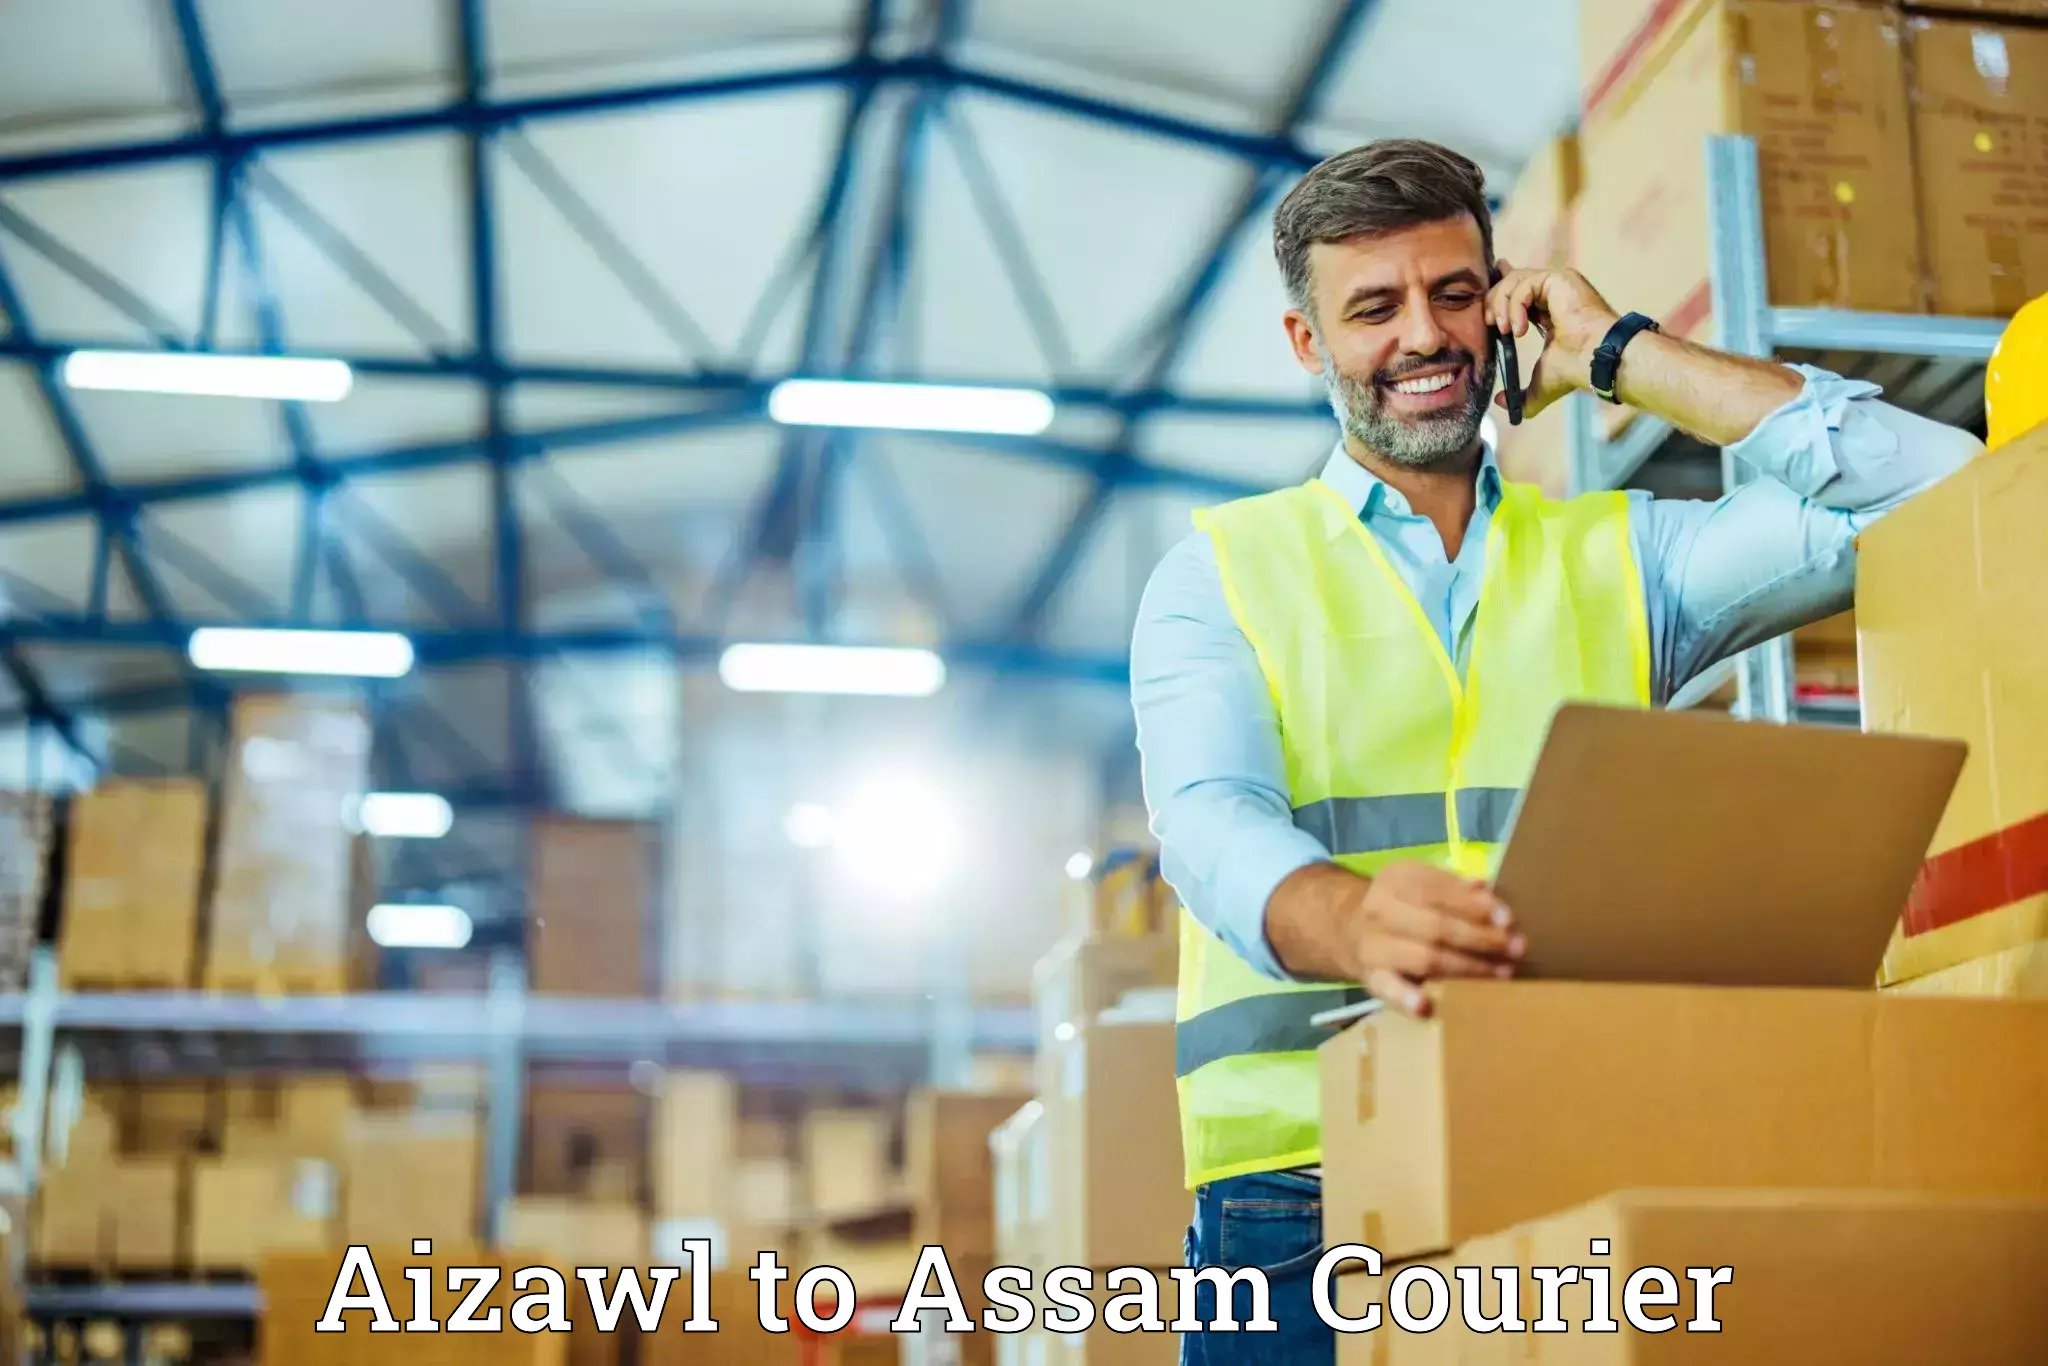 Doorstep moving services in Aizawl to Guwahati University